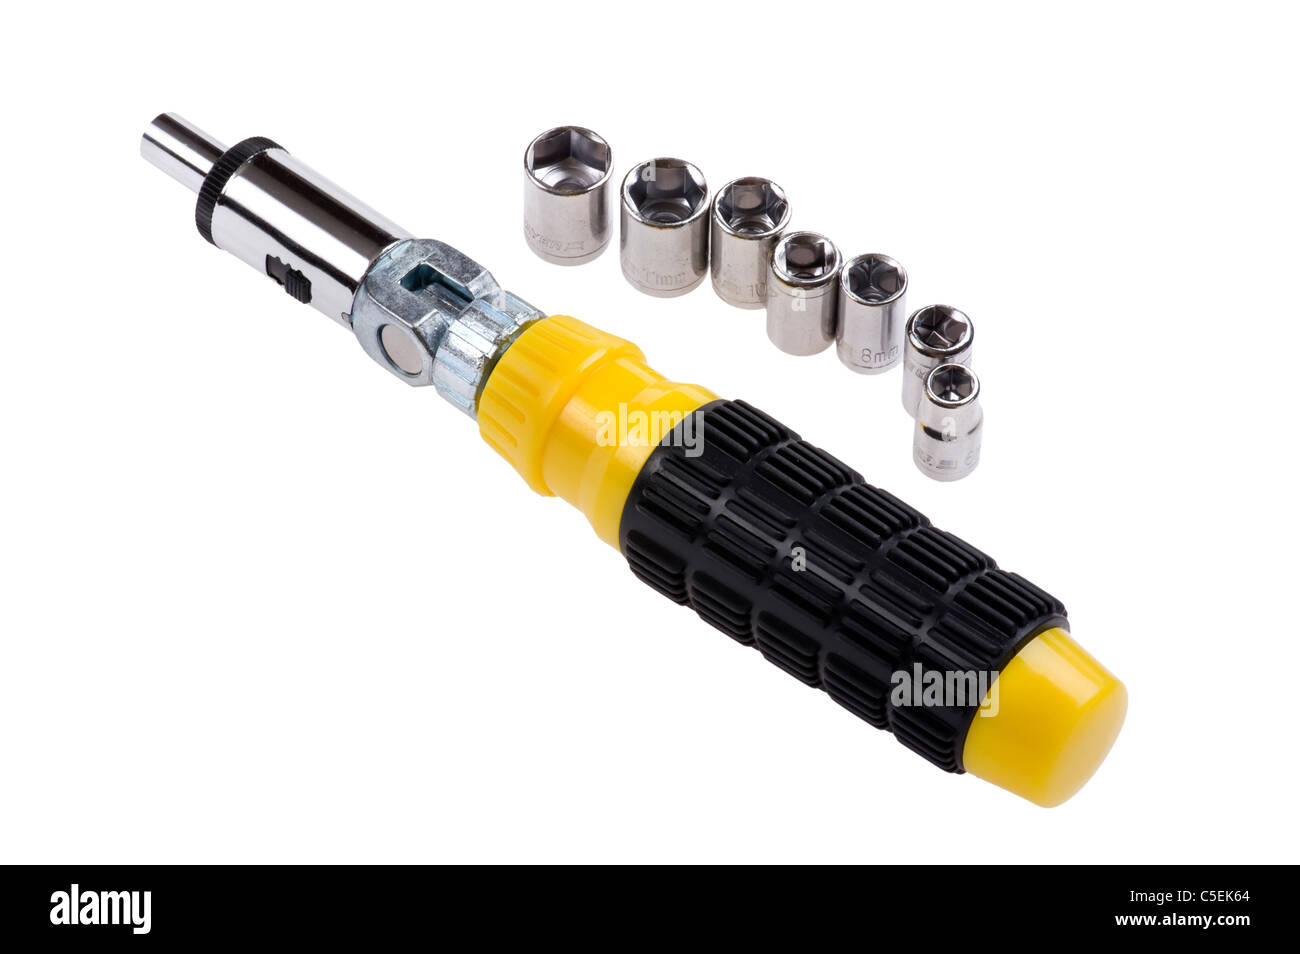 object on white - isolated screwdriver close up Stock Photo